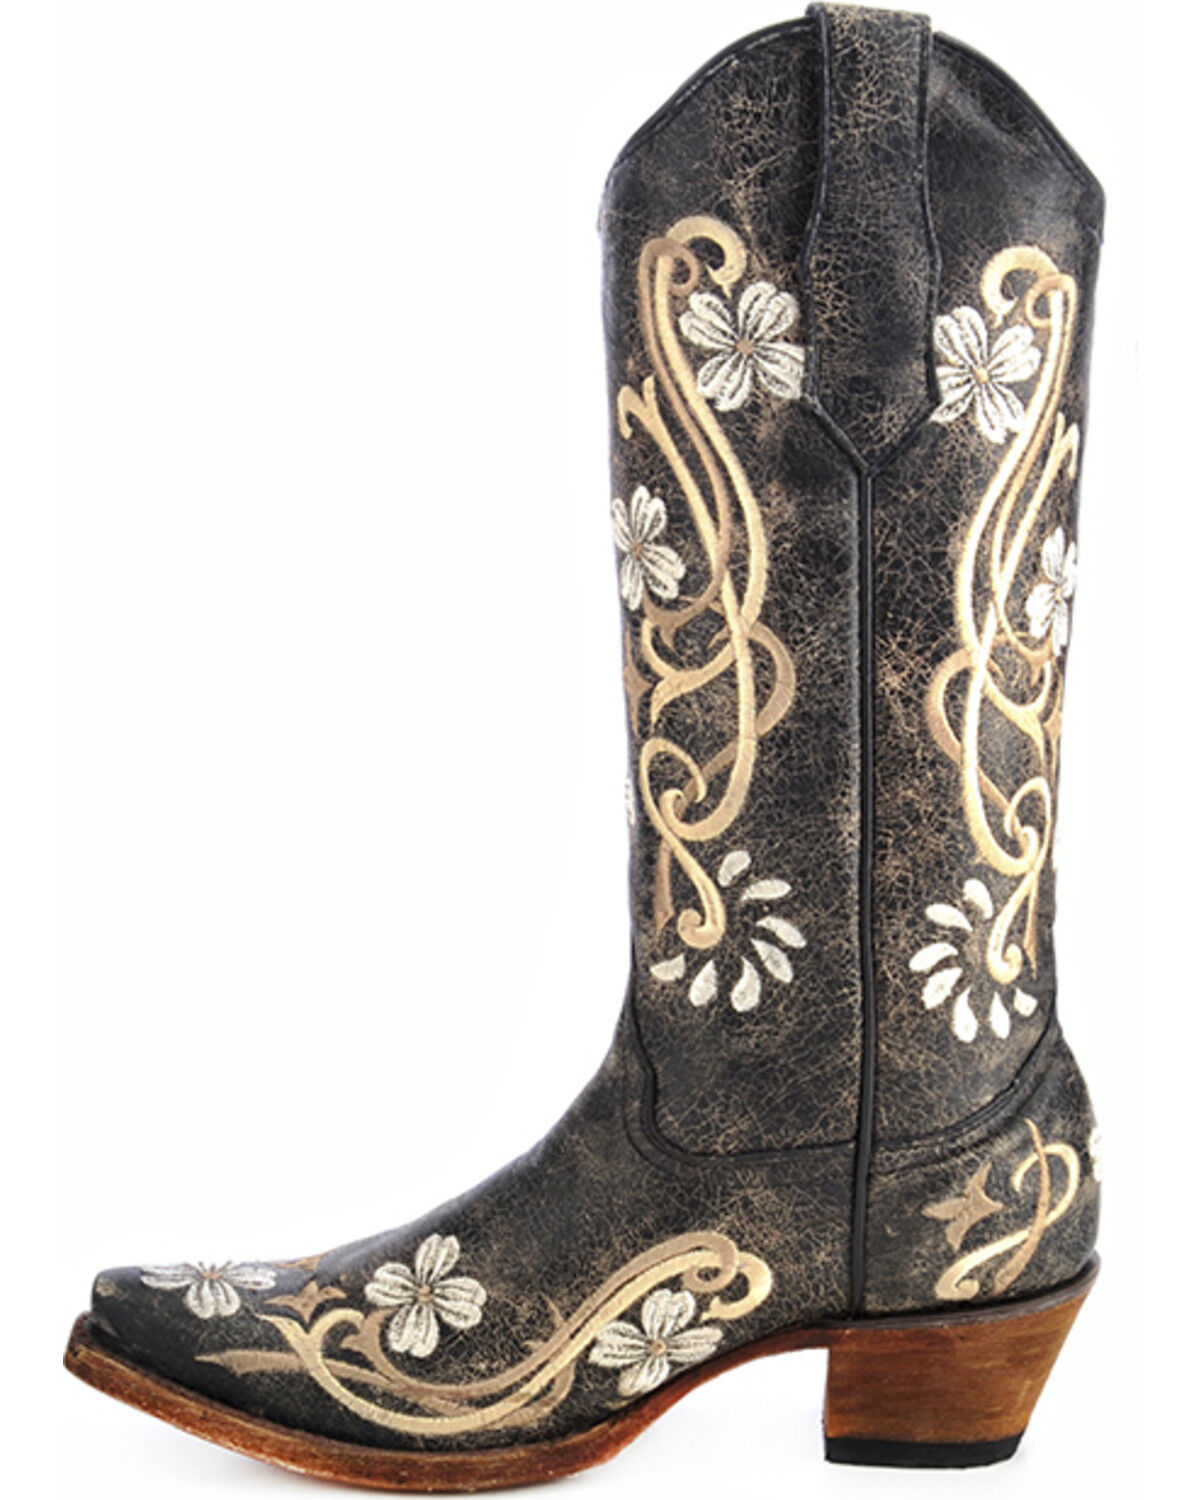 Details about   Kids Western Cowboy Boots Pink Flower Embroidered Square Toe Botas Rancho 